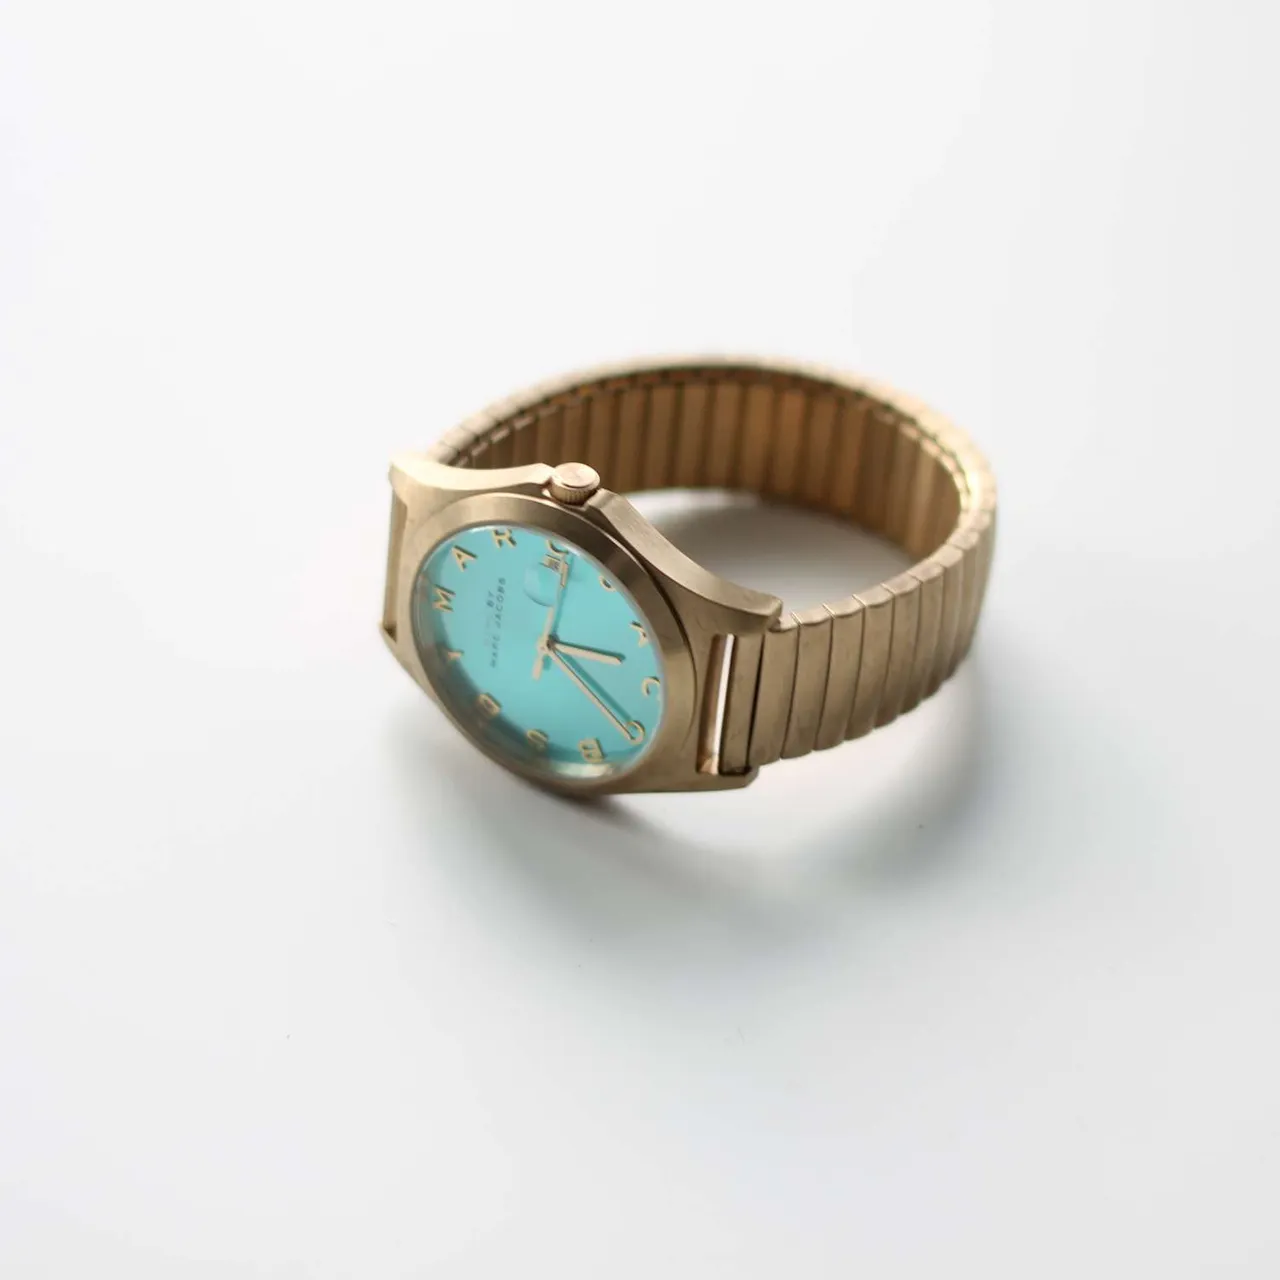 Marc by Marc Jacobs Gold Watch with a Teal Face photo 4